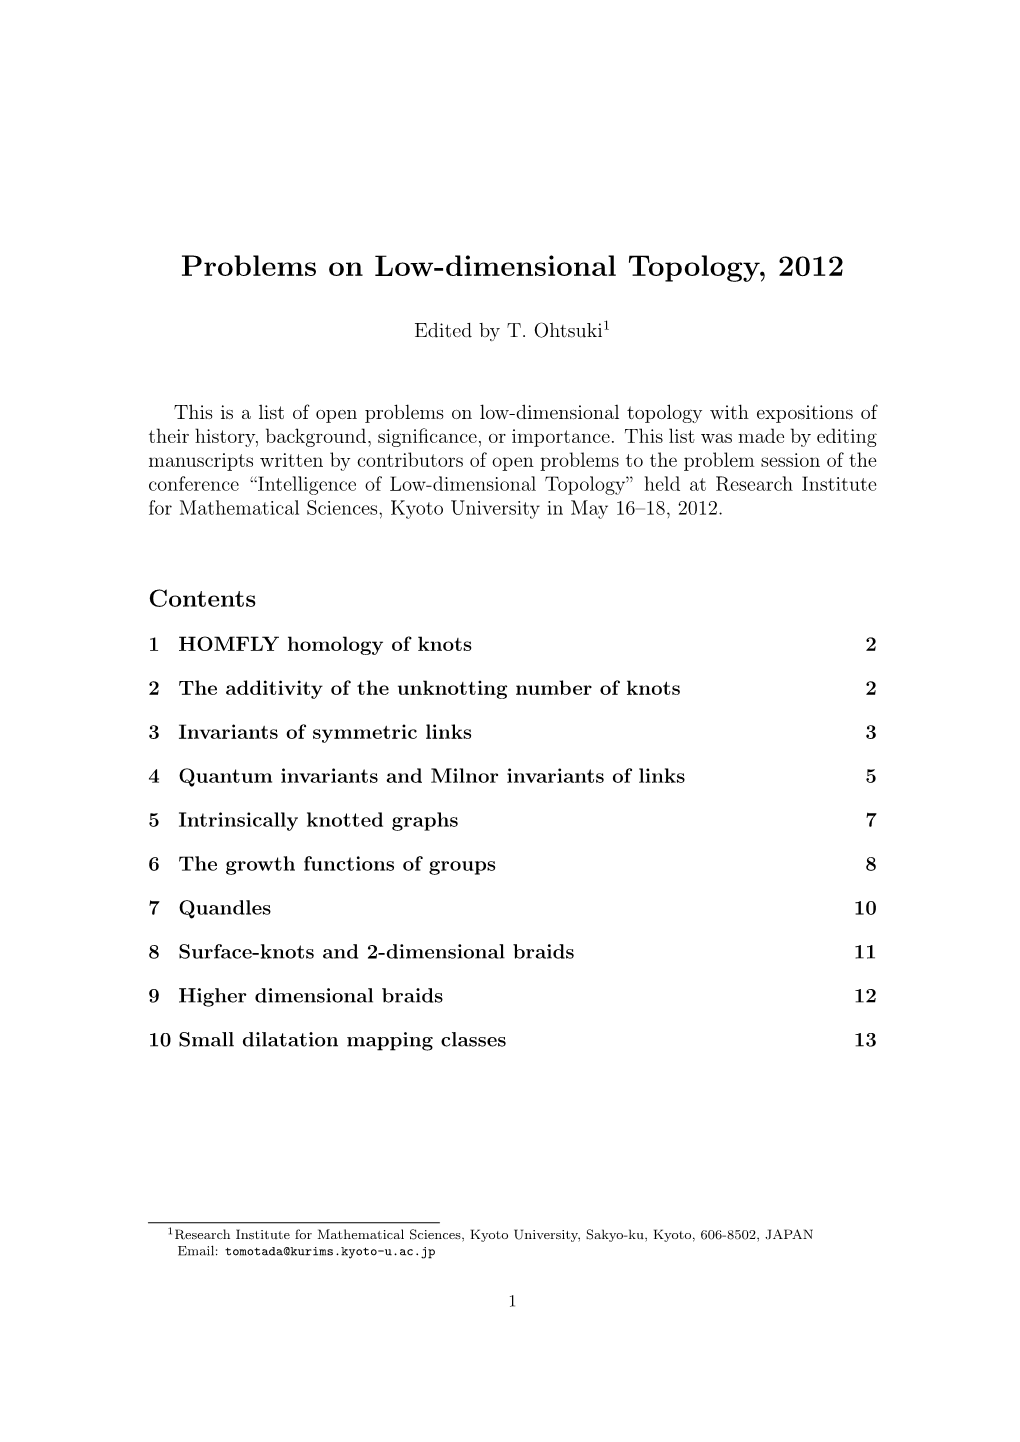 Problems on Low-Dimensional Topology, 2012